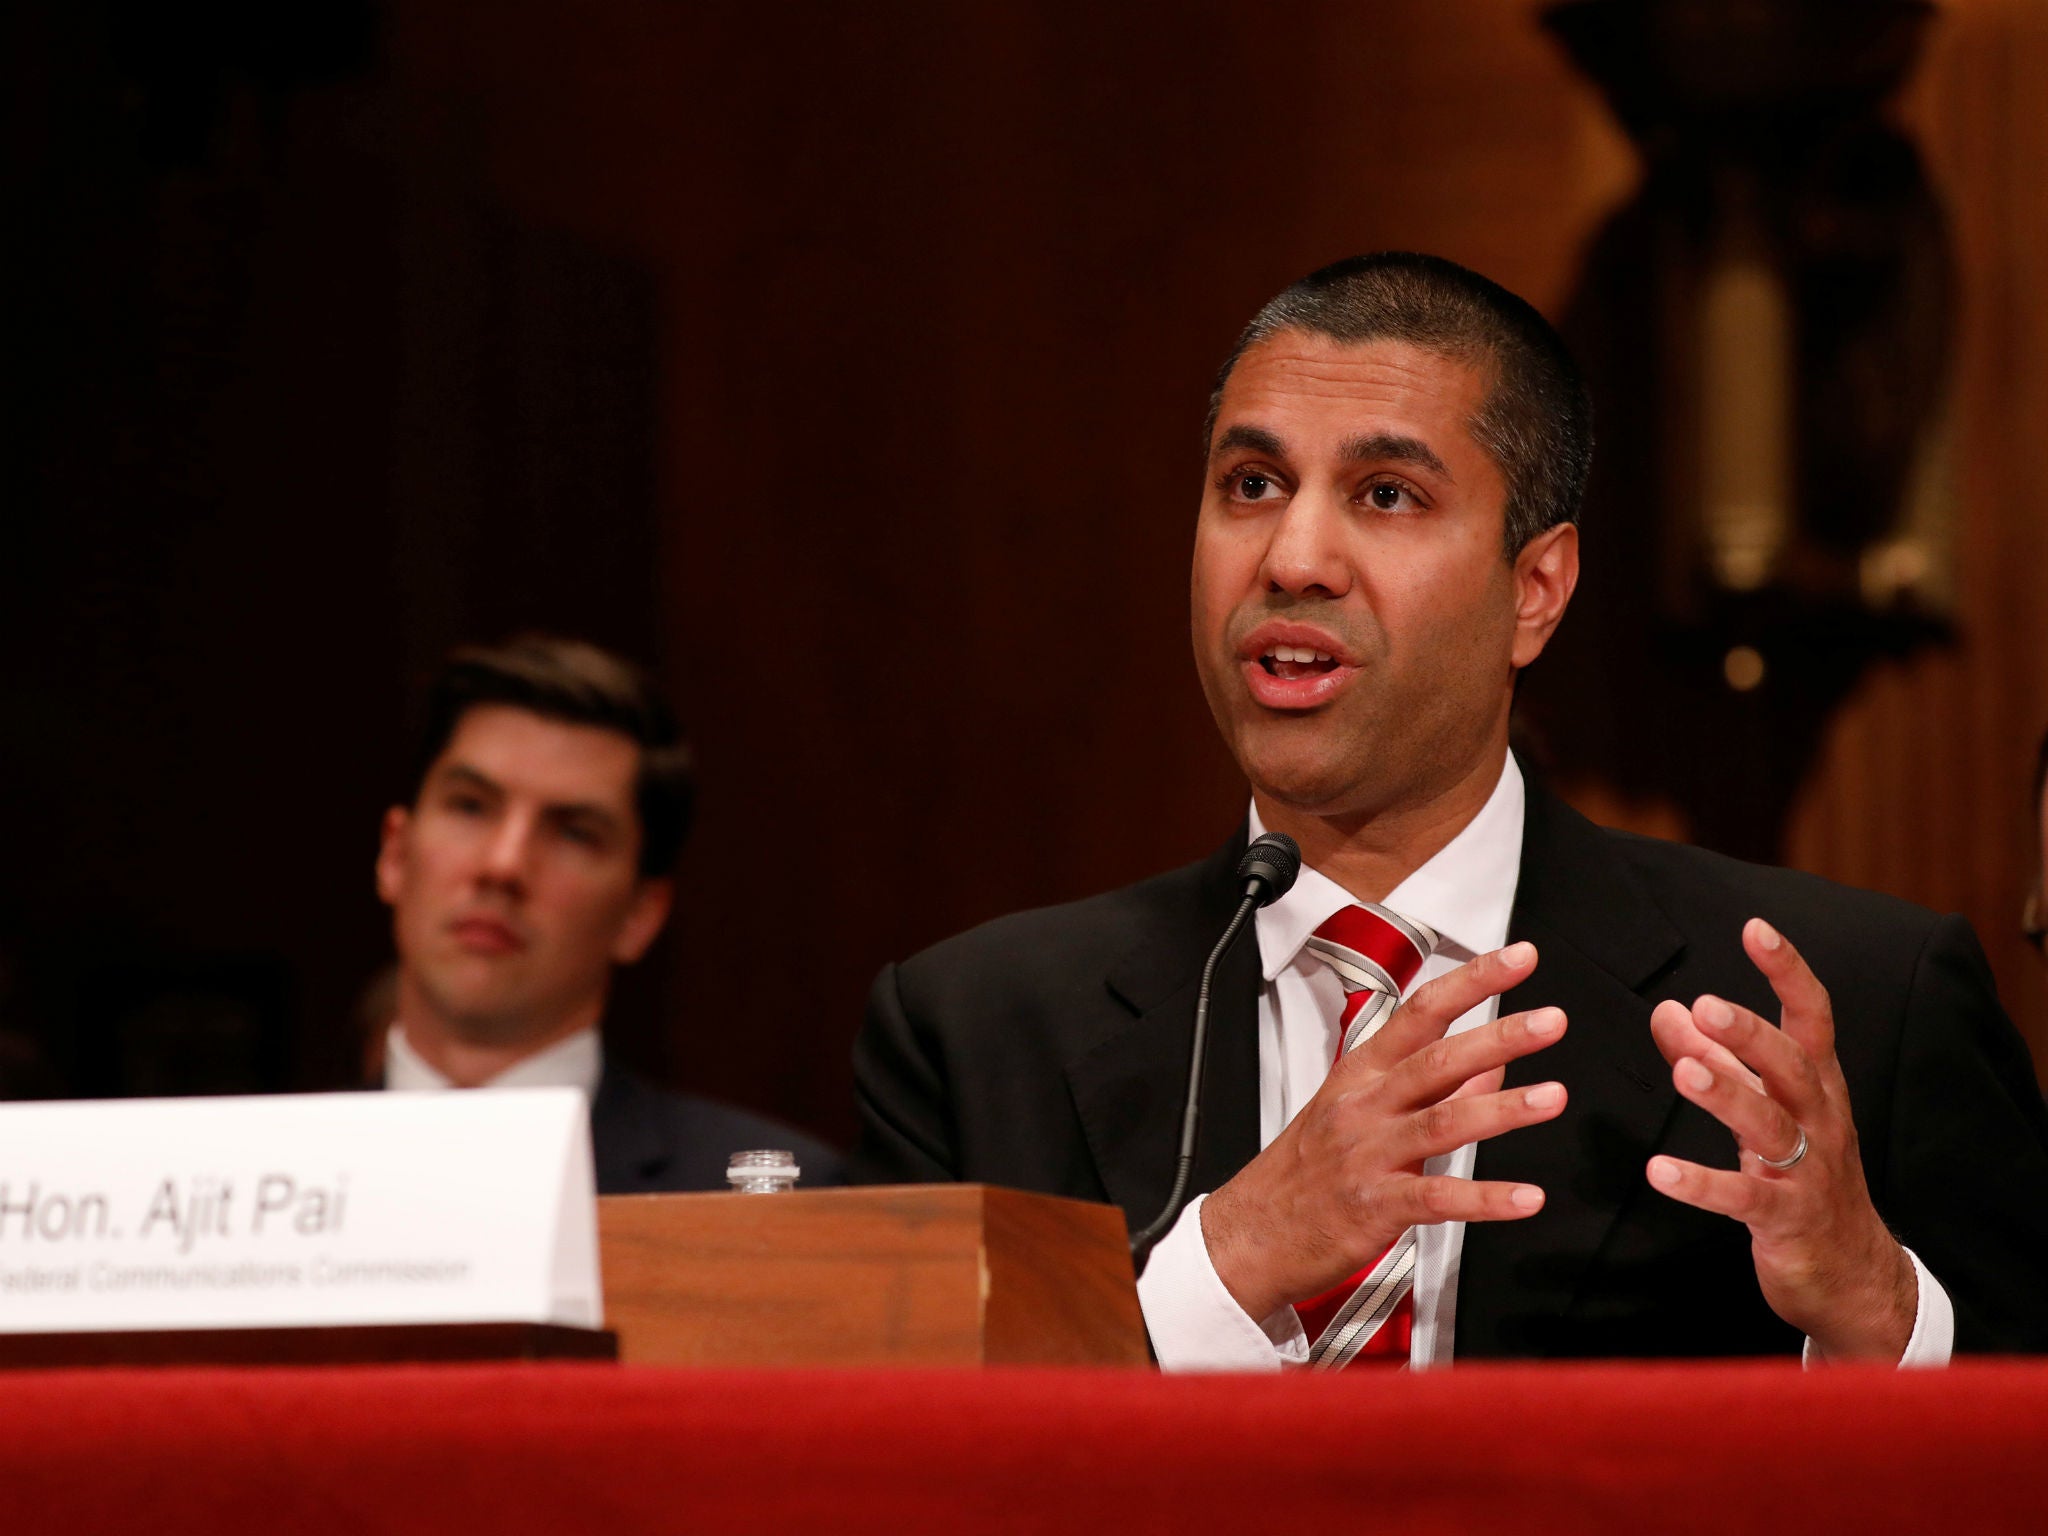 Federal Communications Commission chair Ajit Pai, seen here on Capitol Hill on June 20, 2017, argued newly discarded media ownership rules were relics of another era